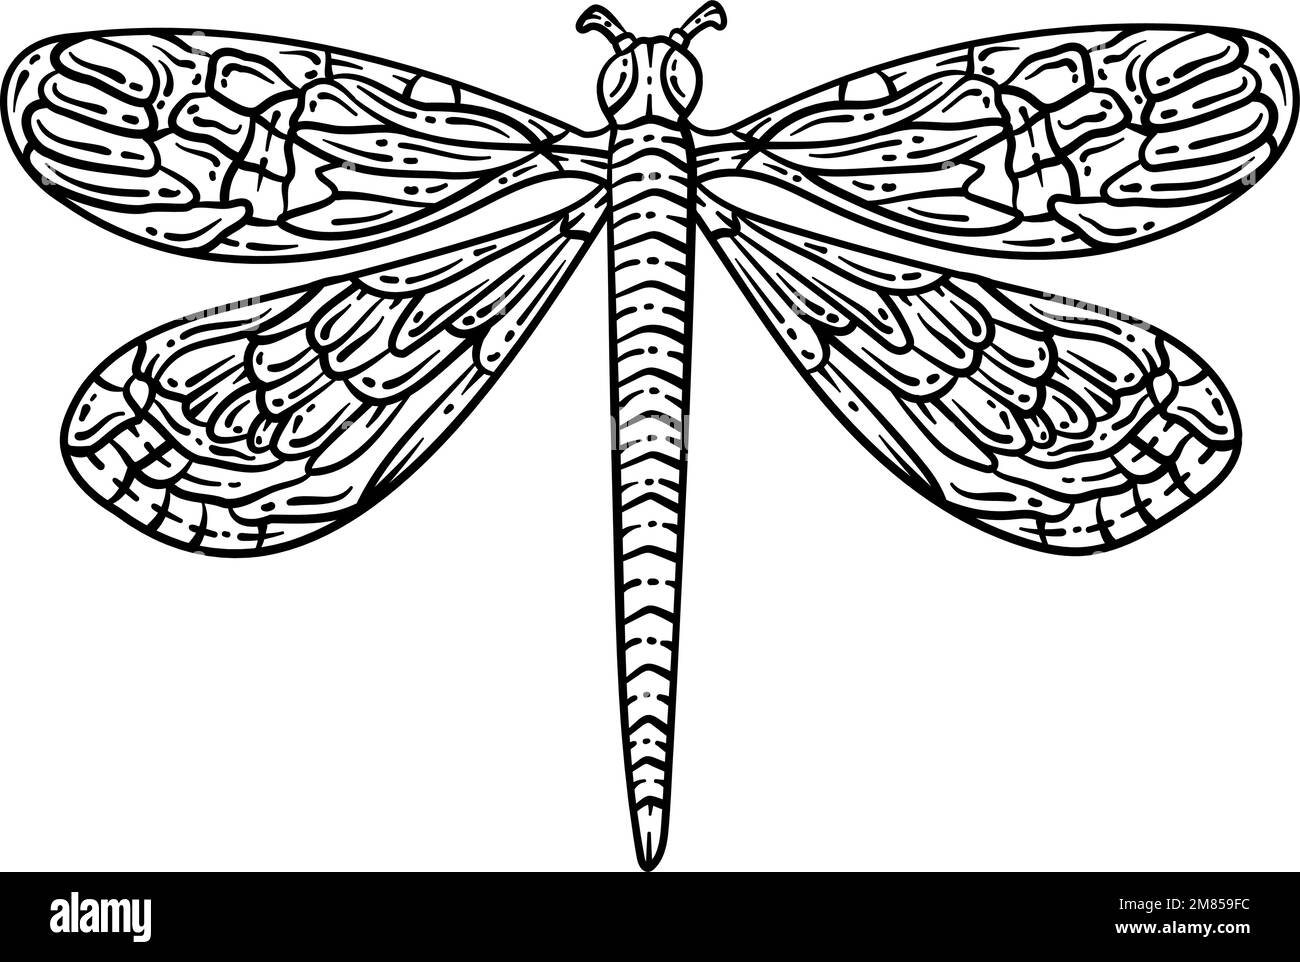 Dragonfly Spring Coloring Page for Adults Stock Vector